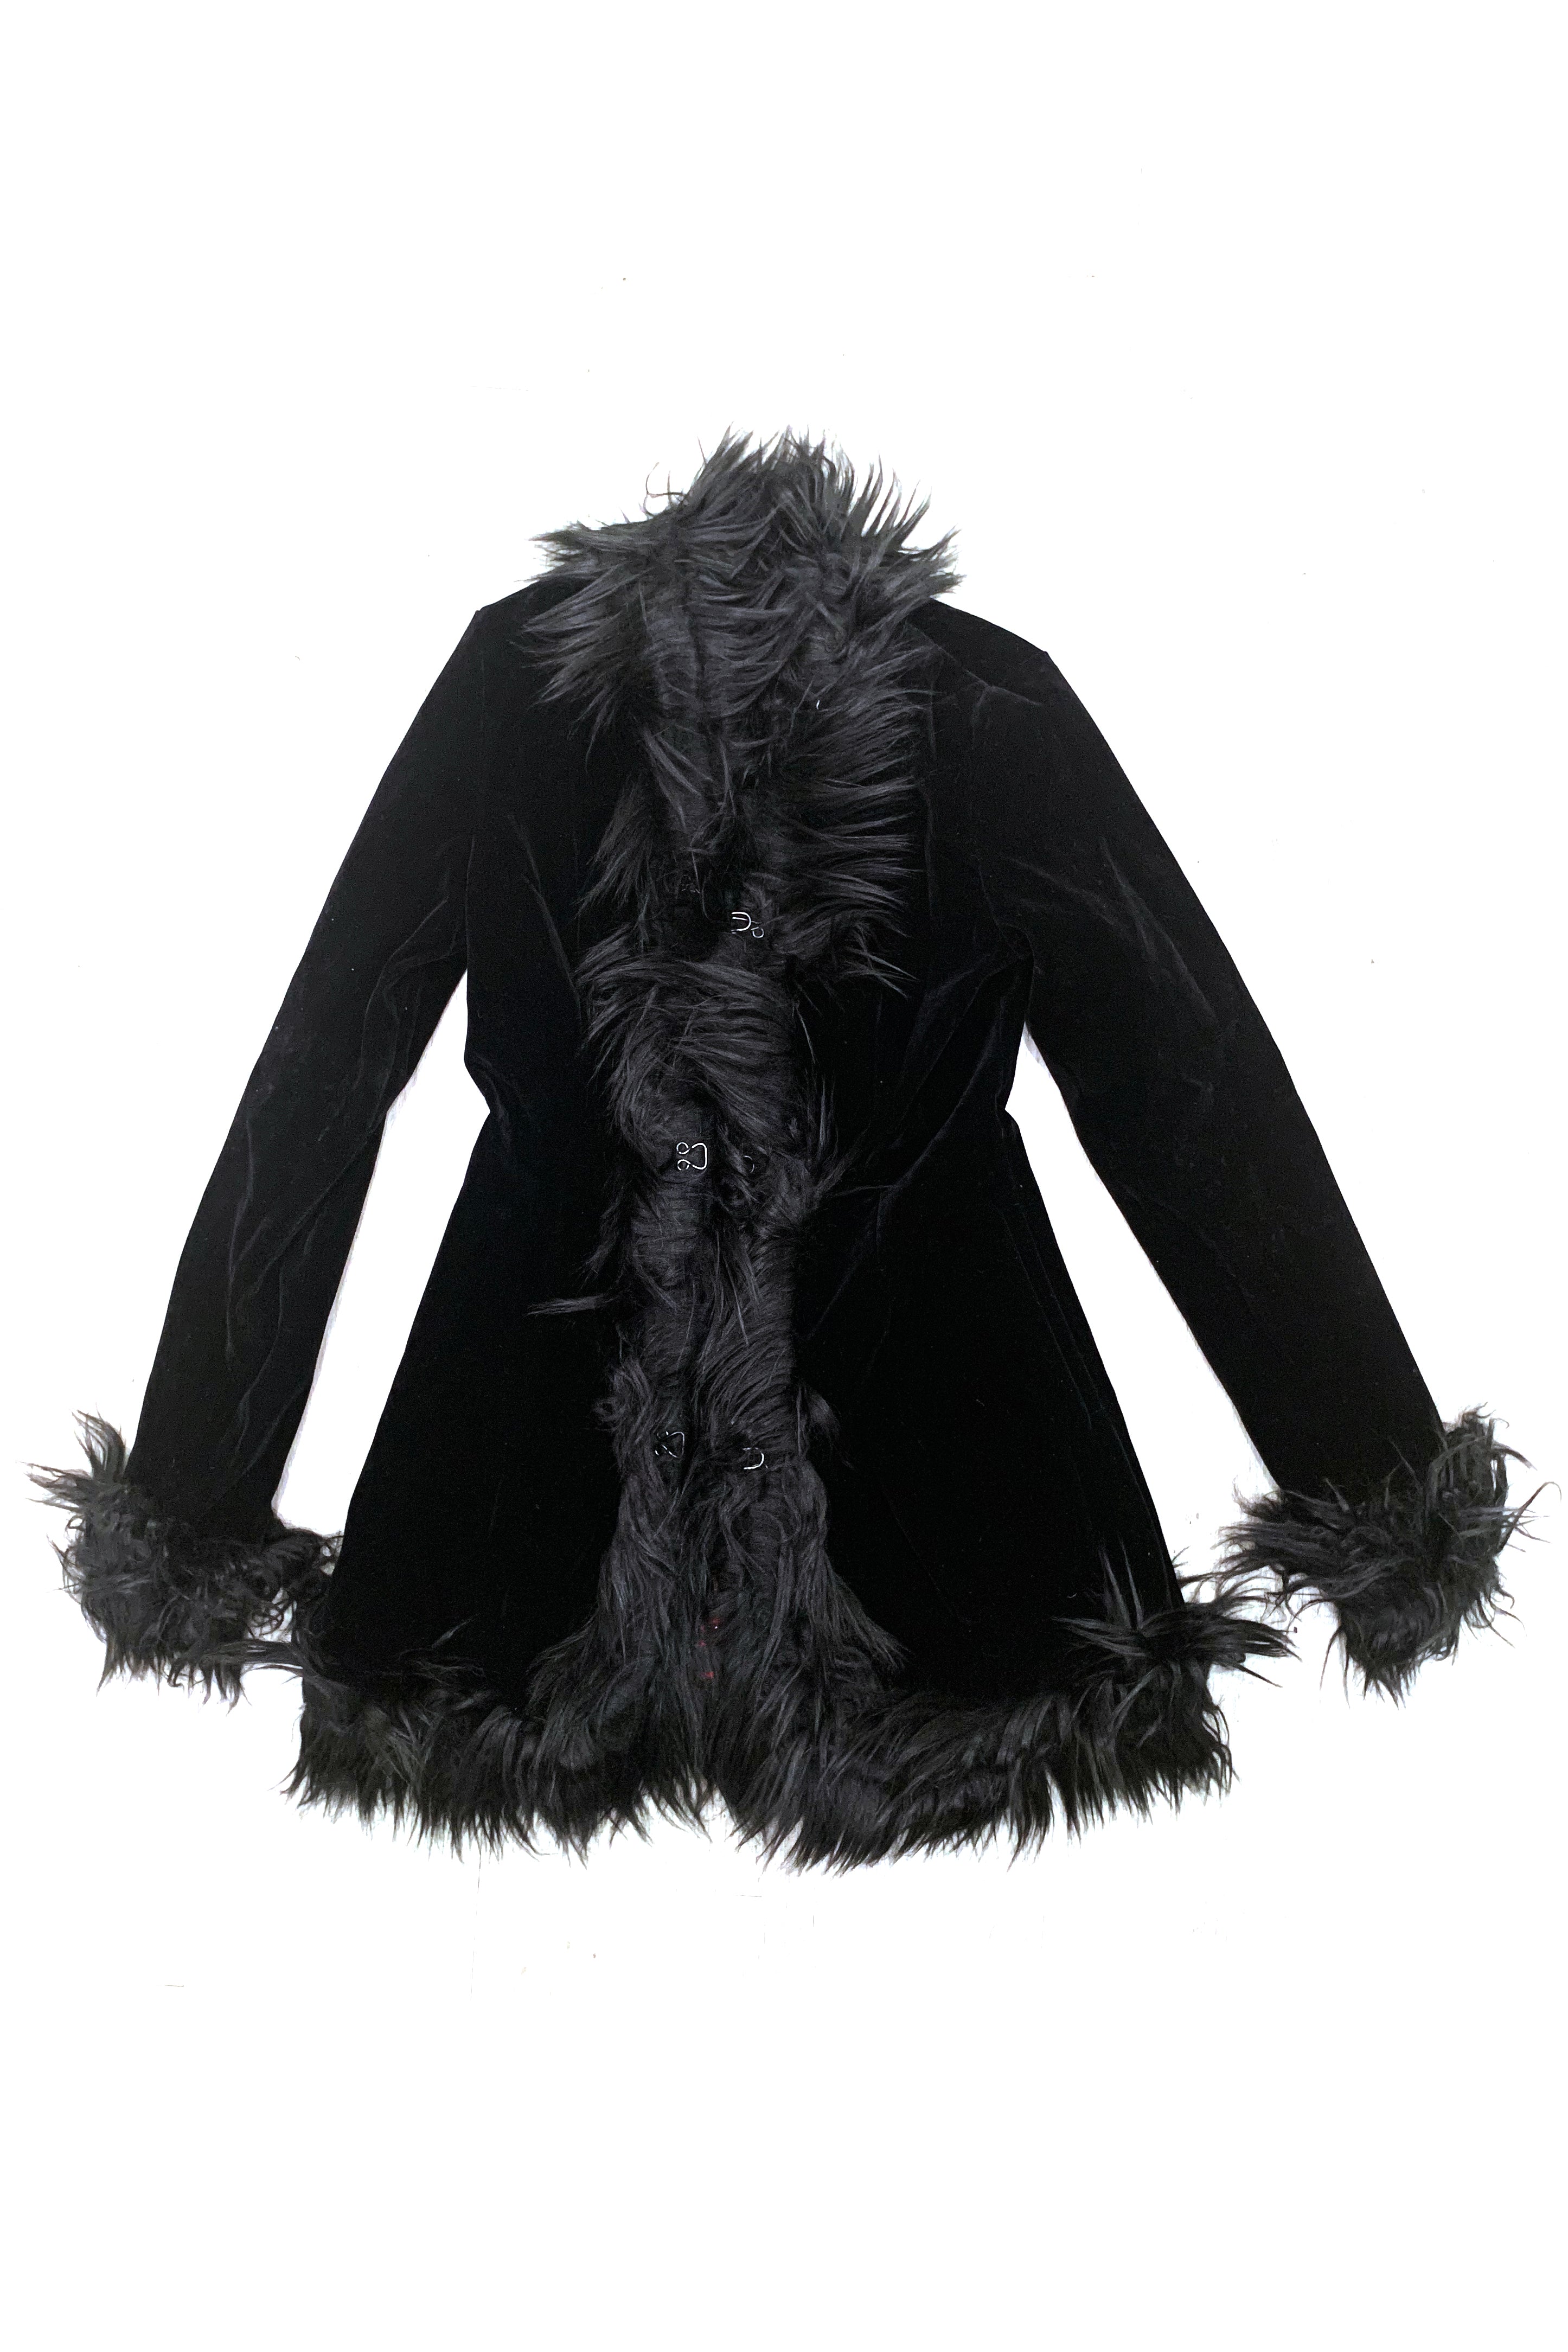 Cleo Reversible Faux Fur Jacket – Tunnel Vision